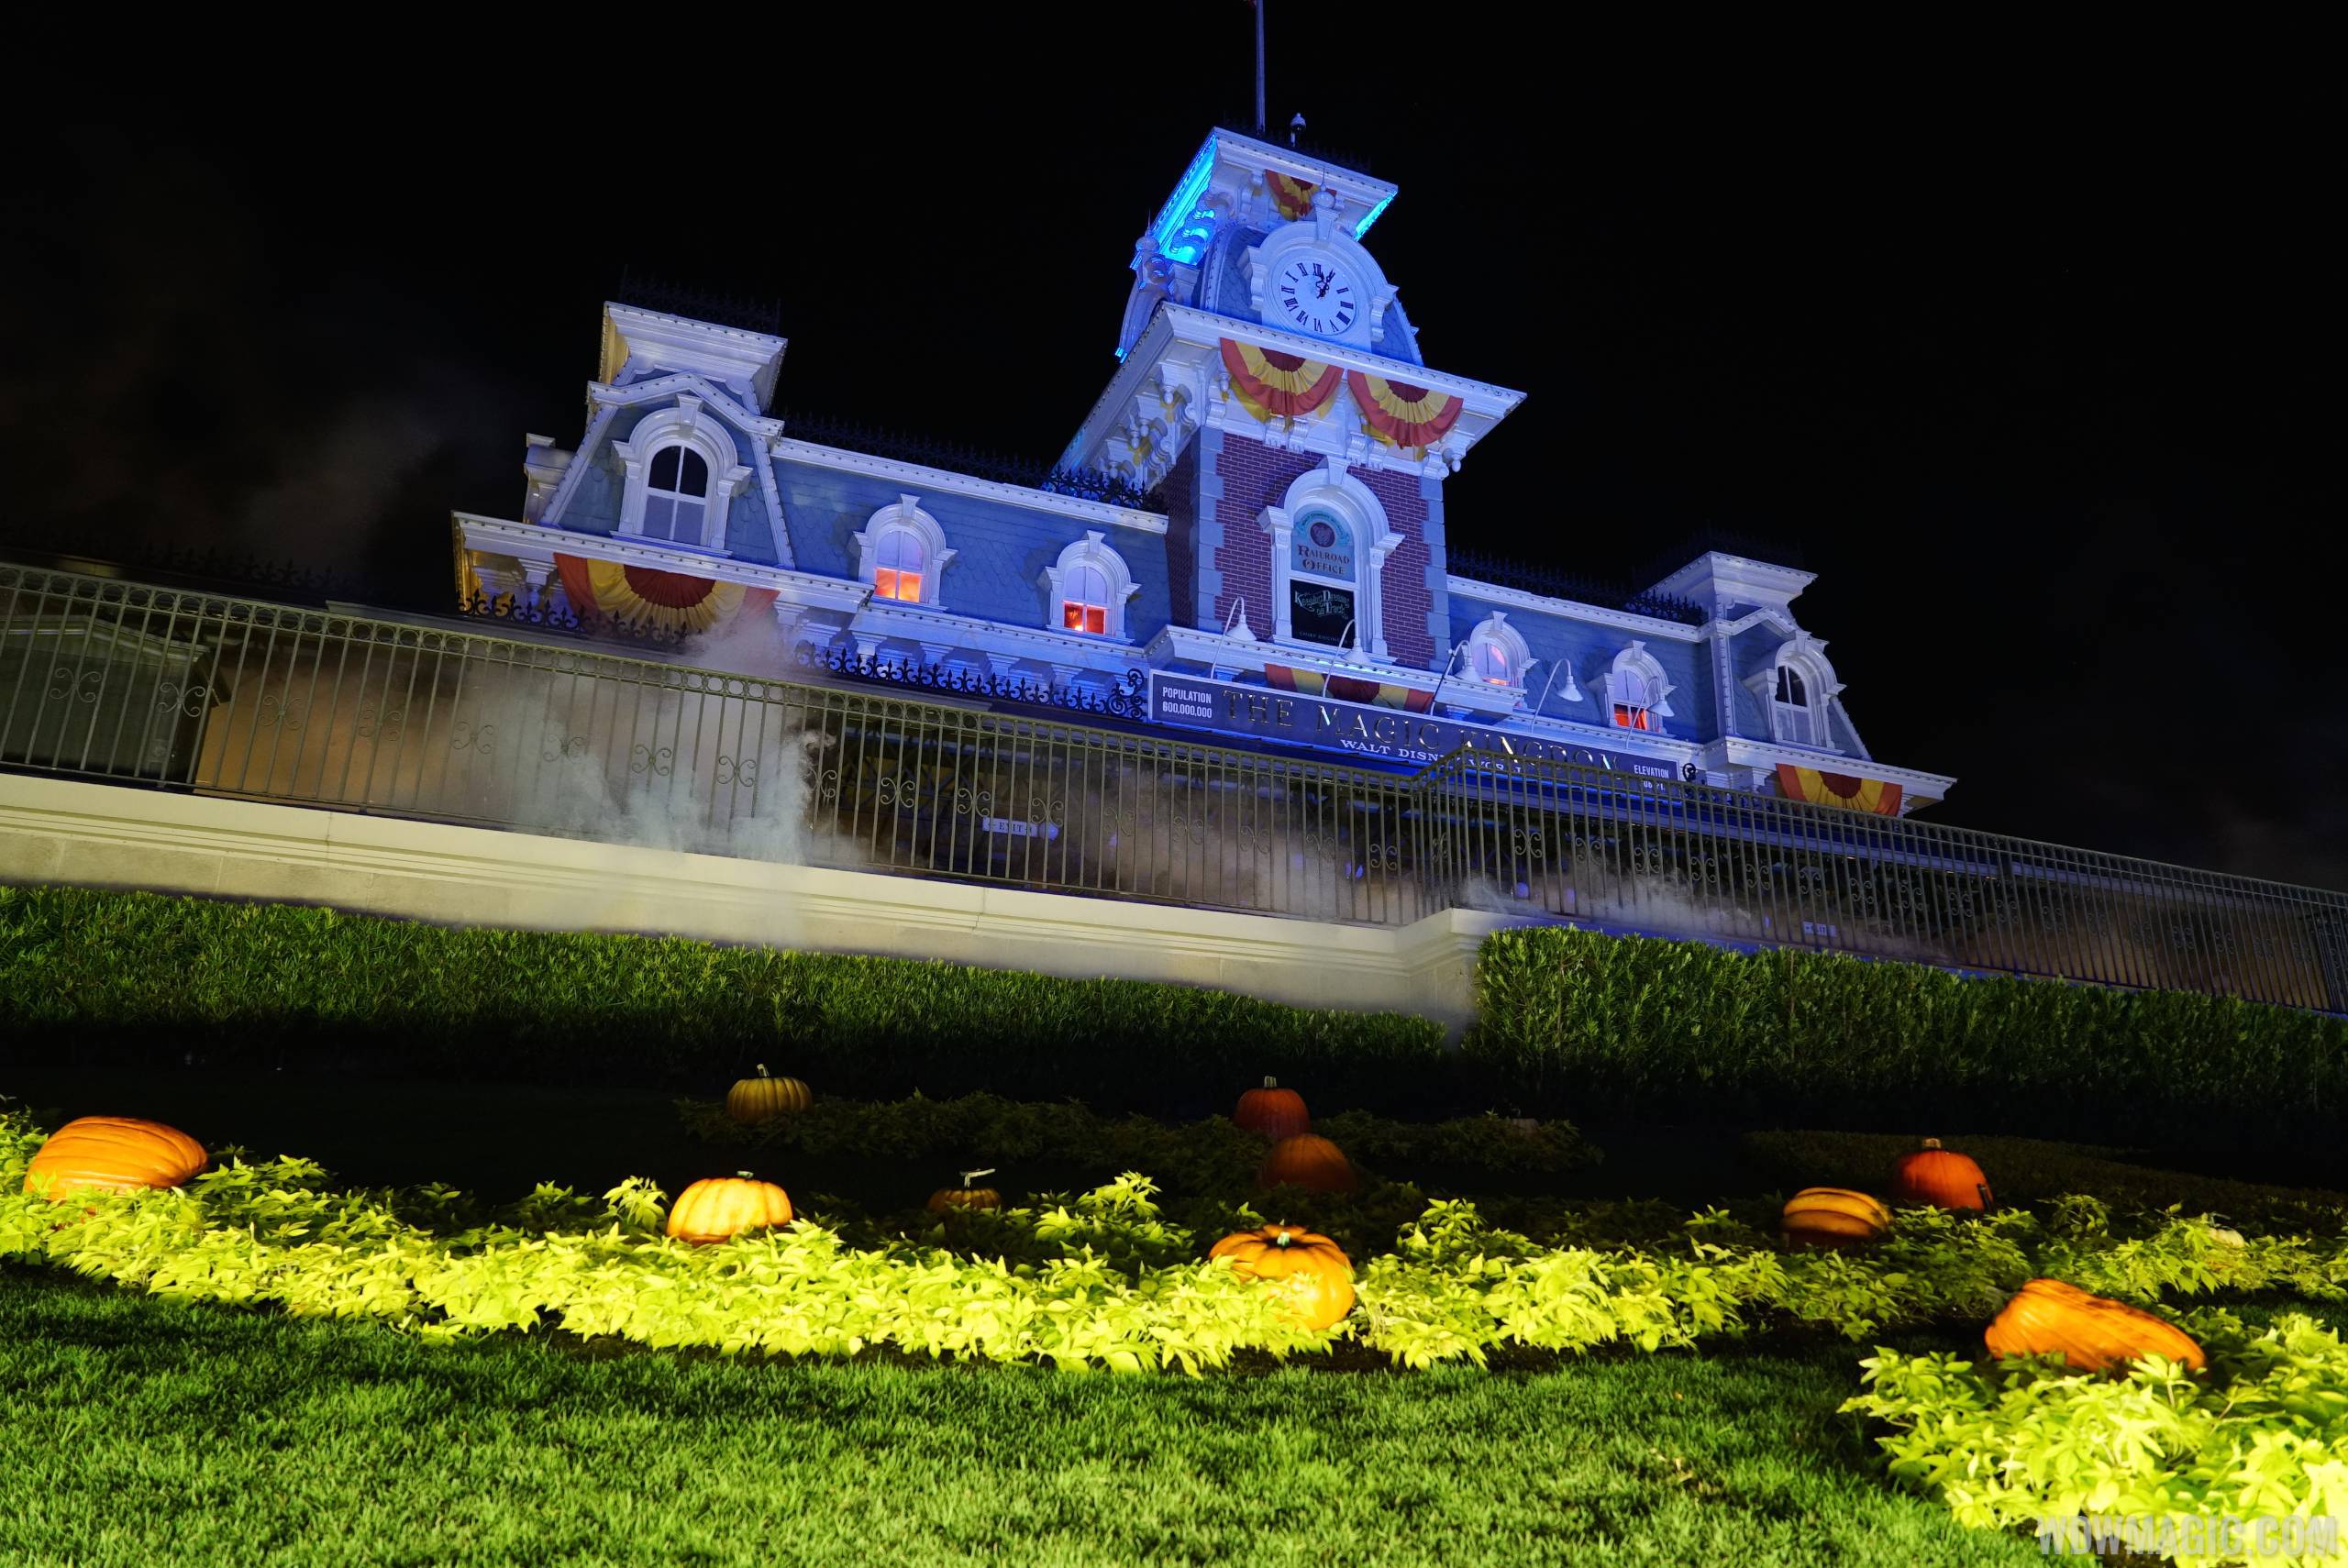 PHOTO GALLERY - Mickey's Not-So-Scary Halloween Party